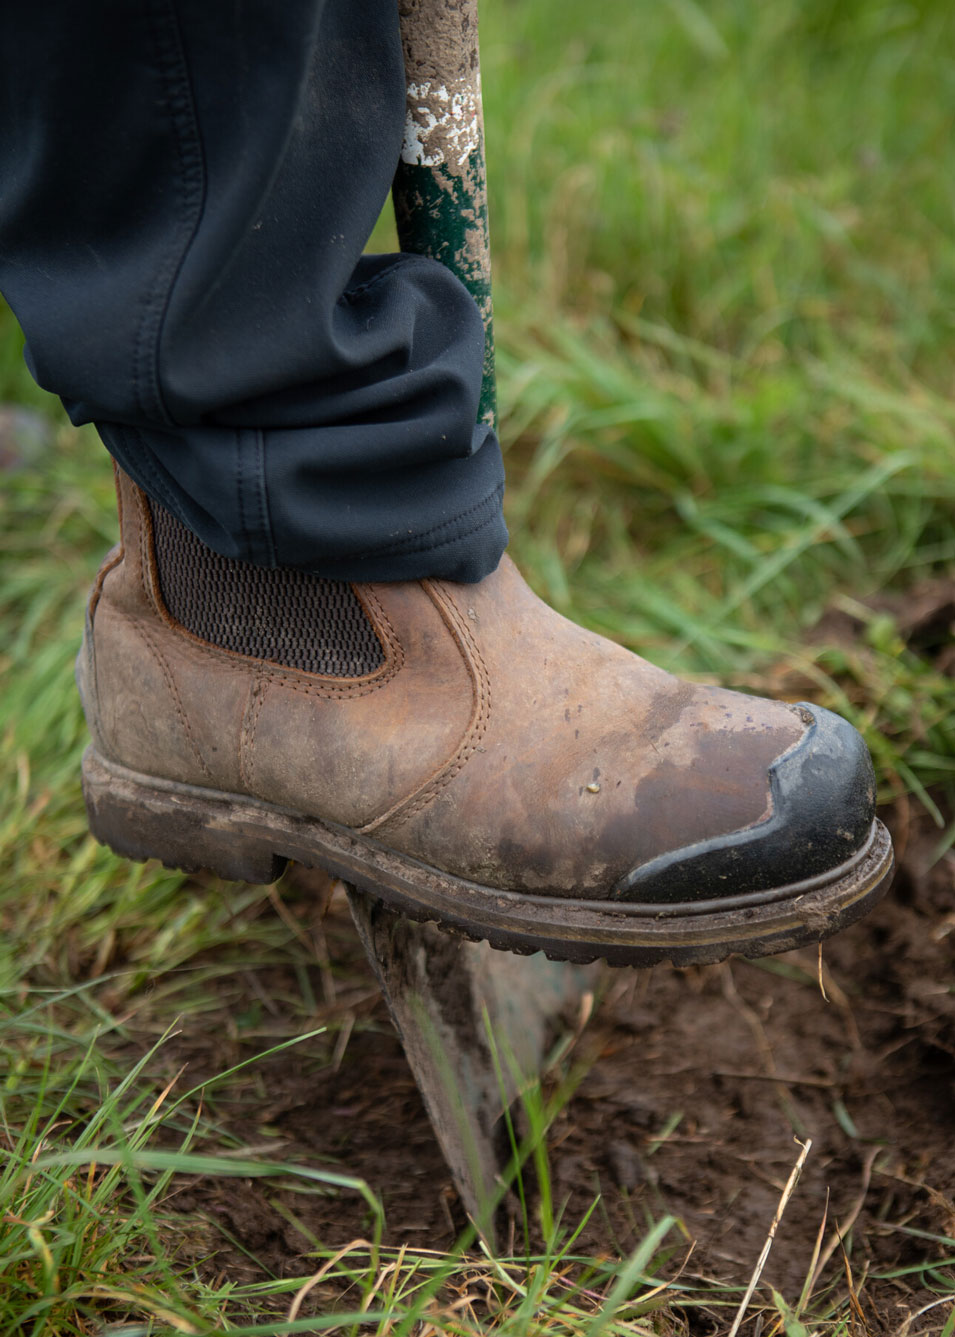 Close up of boot pressing a spade into the soil. Credit Charlie Fox.